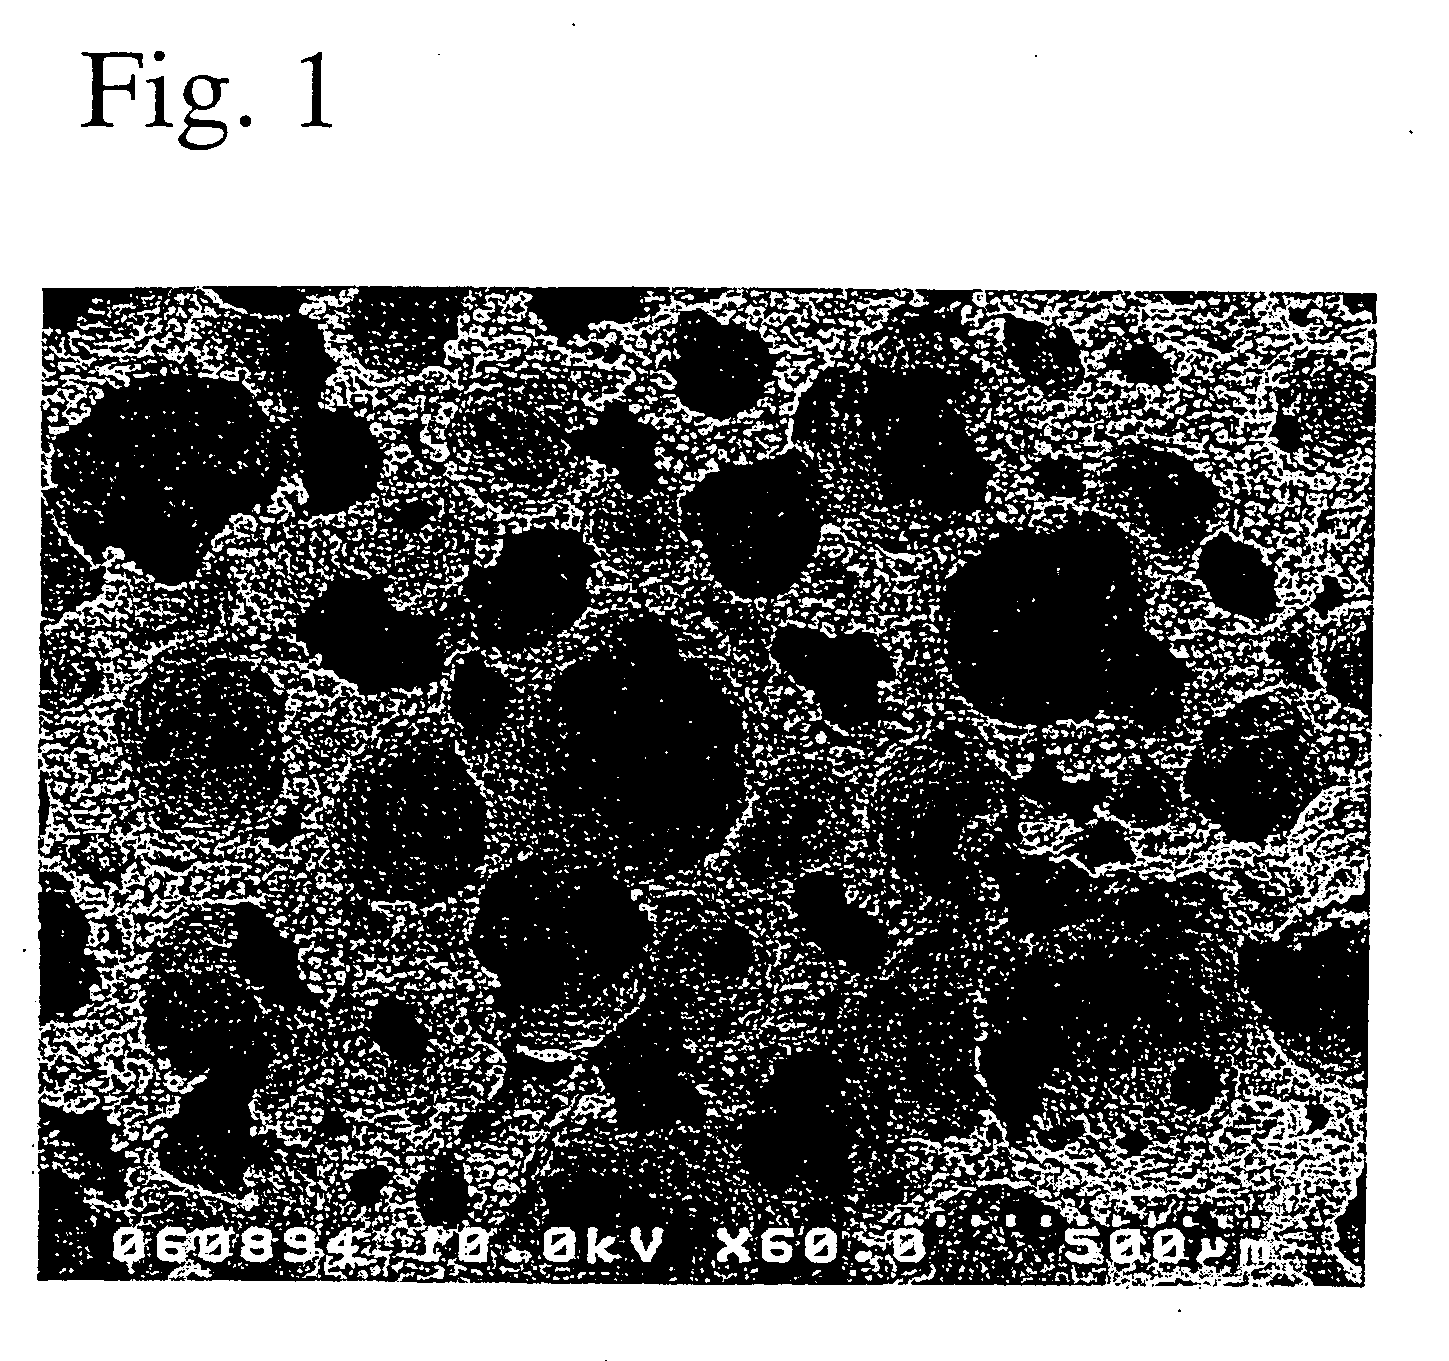 Porous sintered body of calcium phosphate-based ceramic and method for producing same